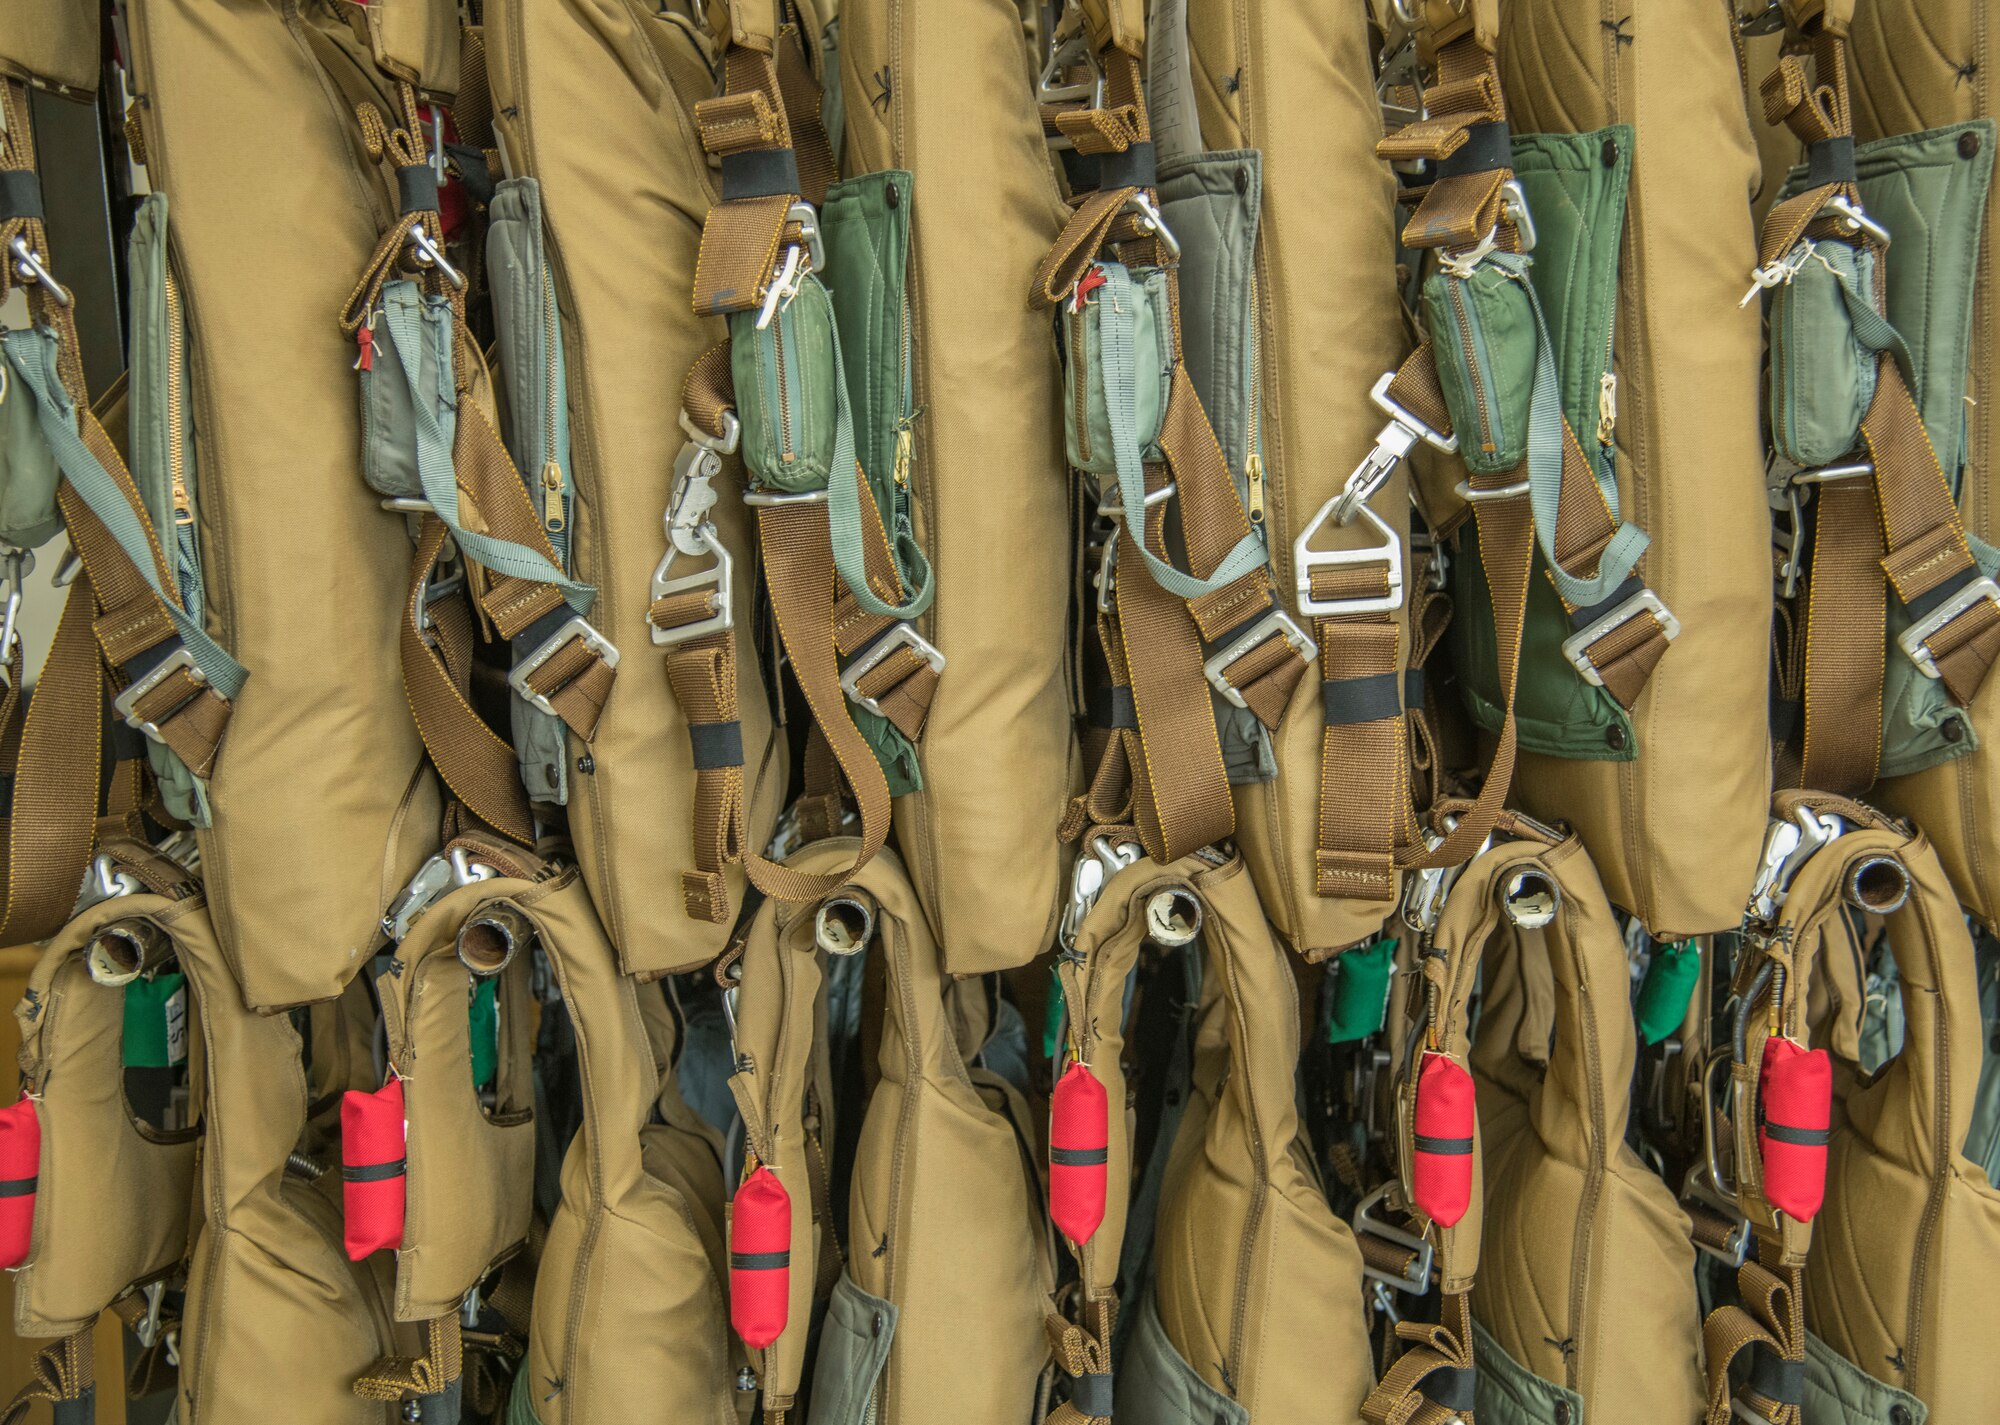 A multitude of BA-30 Low Profile Parachute systems hang in the 403rd Fabrication Flight building on Keesler Air Force Base, Miss., April 29, 2021. The 403rd Operations Support Squadron received 60 of these systems to replace the bulkier BA-22 parachute systems. (U.S. Air Force photo by Staff Sgt. Kristen Pittman)